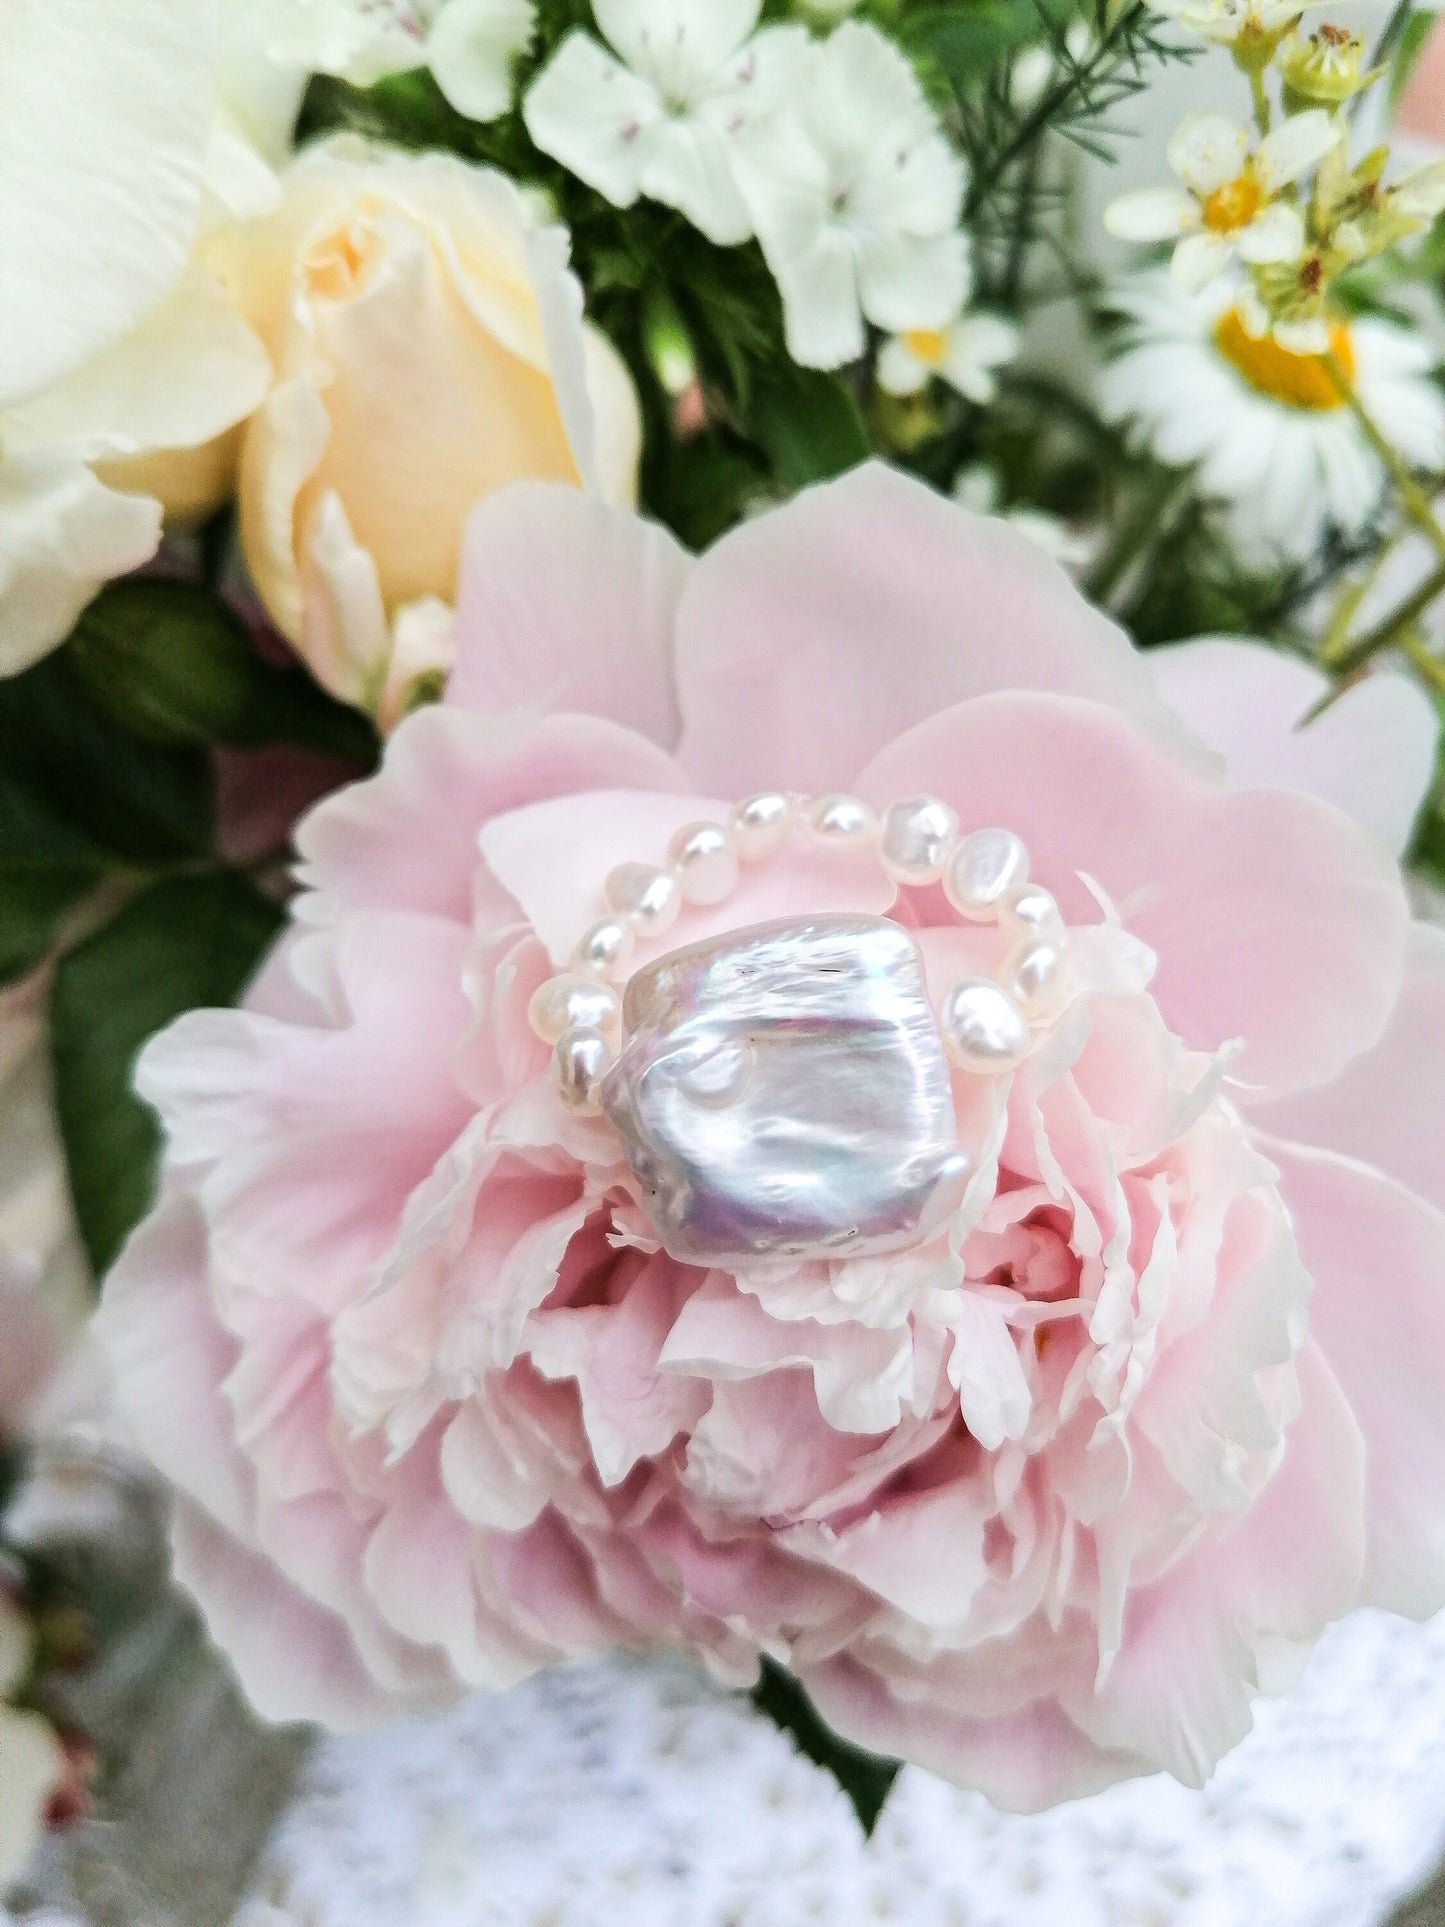 Square pearl ring